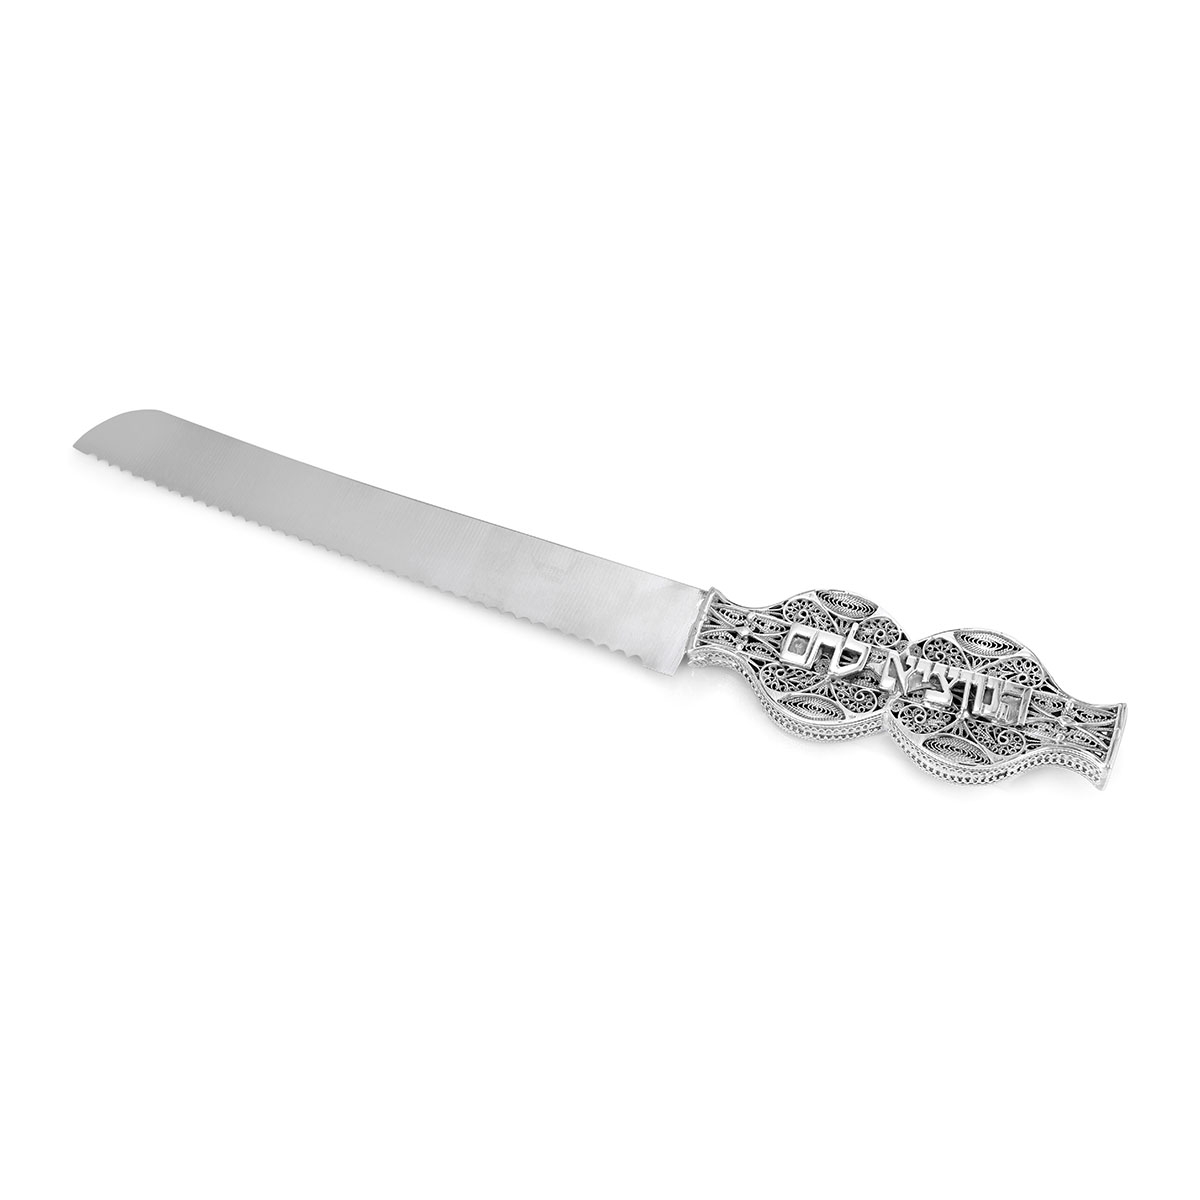 Traditional Yemenite Art Handcrafted Sterling Silver "Hamotzi" Challah Knife With Pomegranate Filigree Design - 1